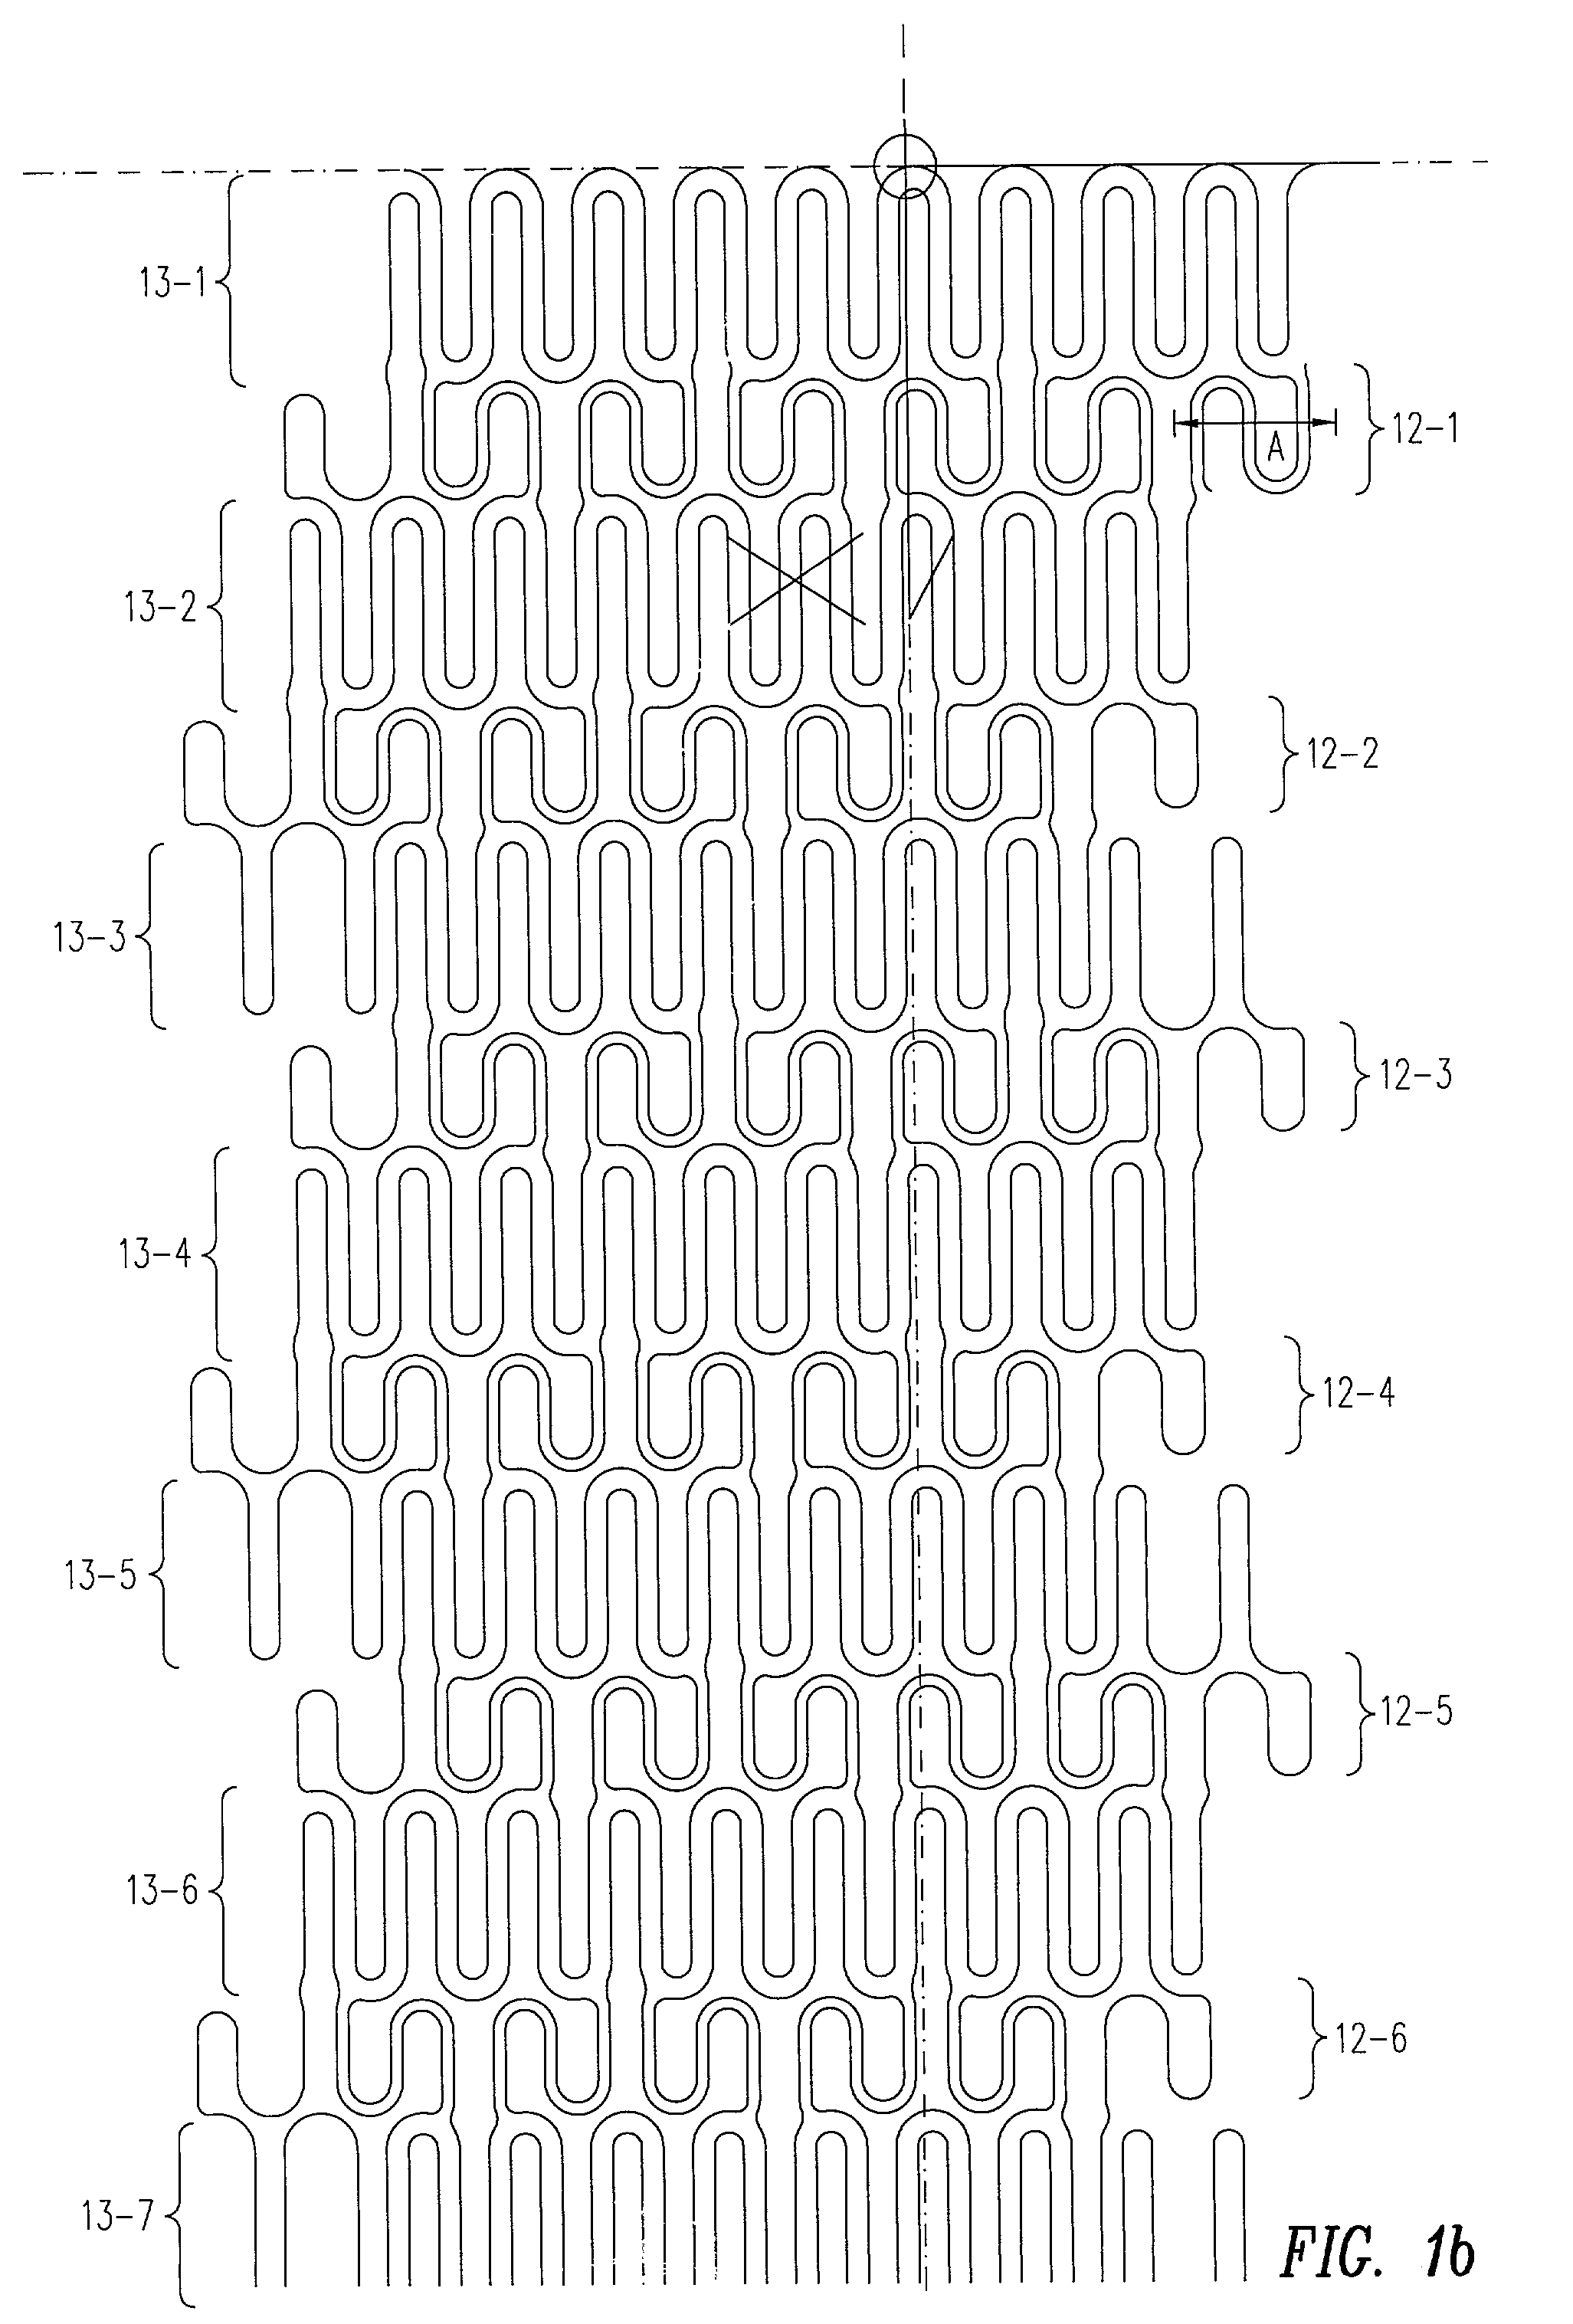 Flexible and conformable stent and method of forming same